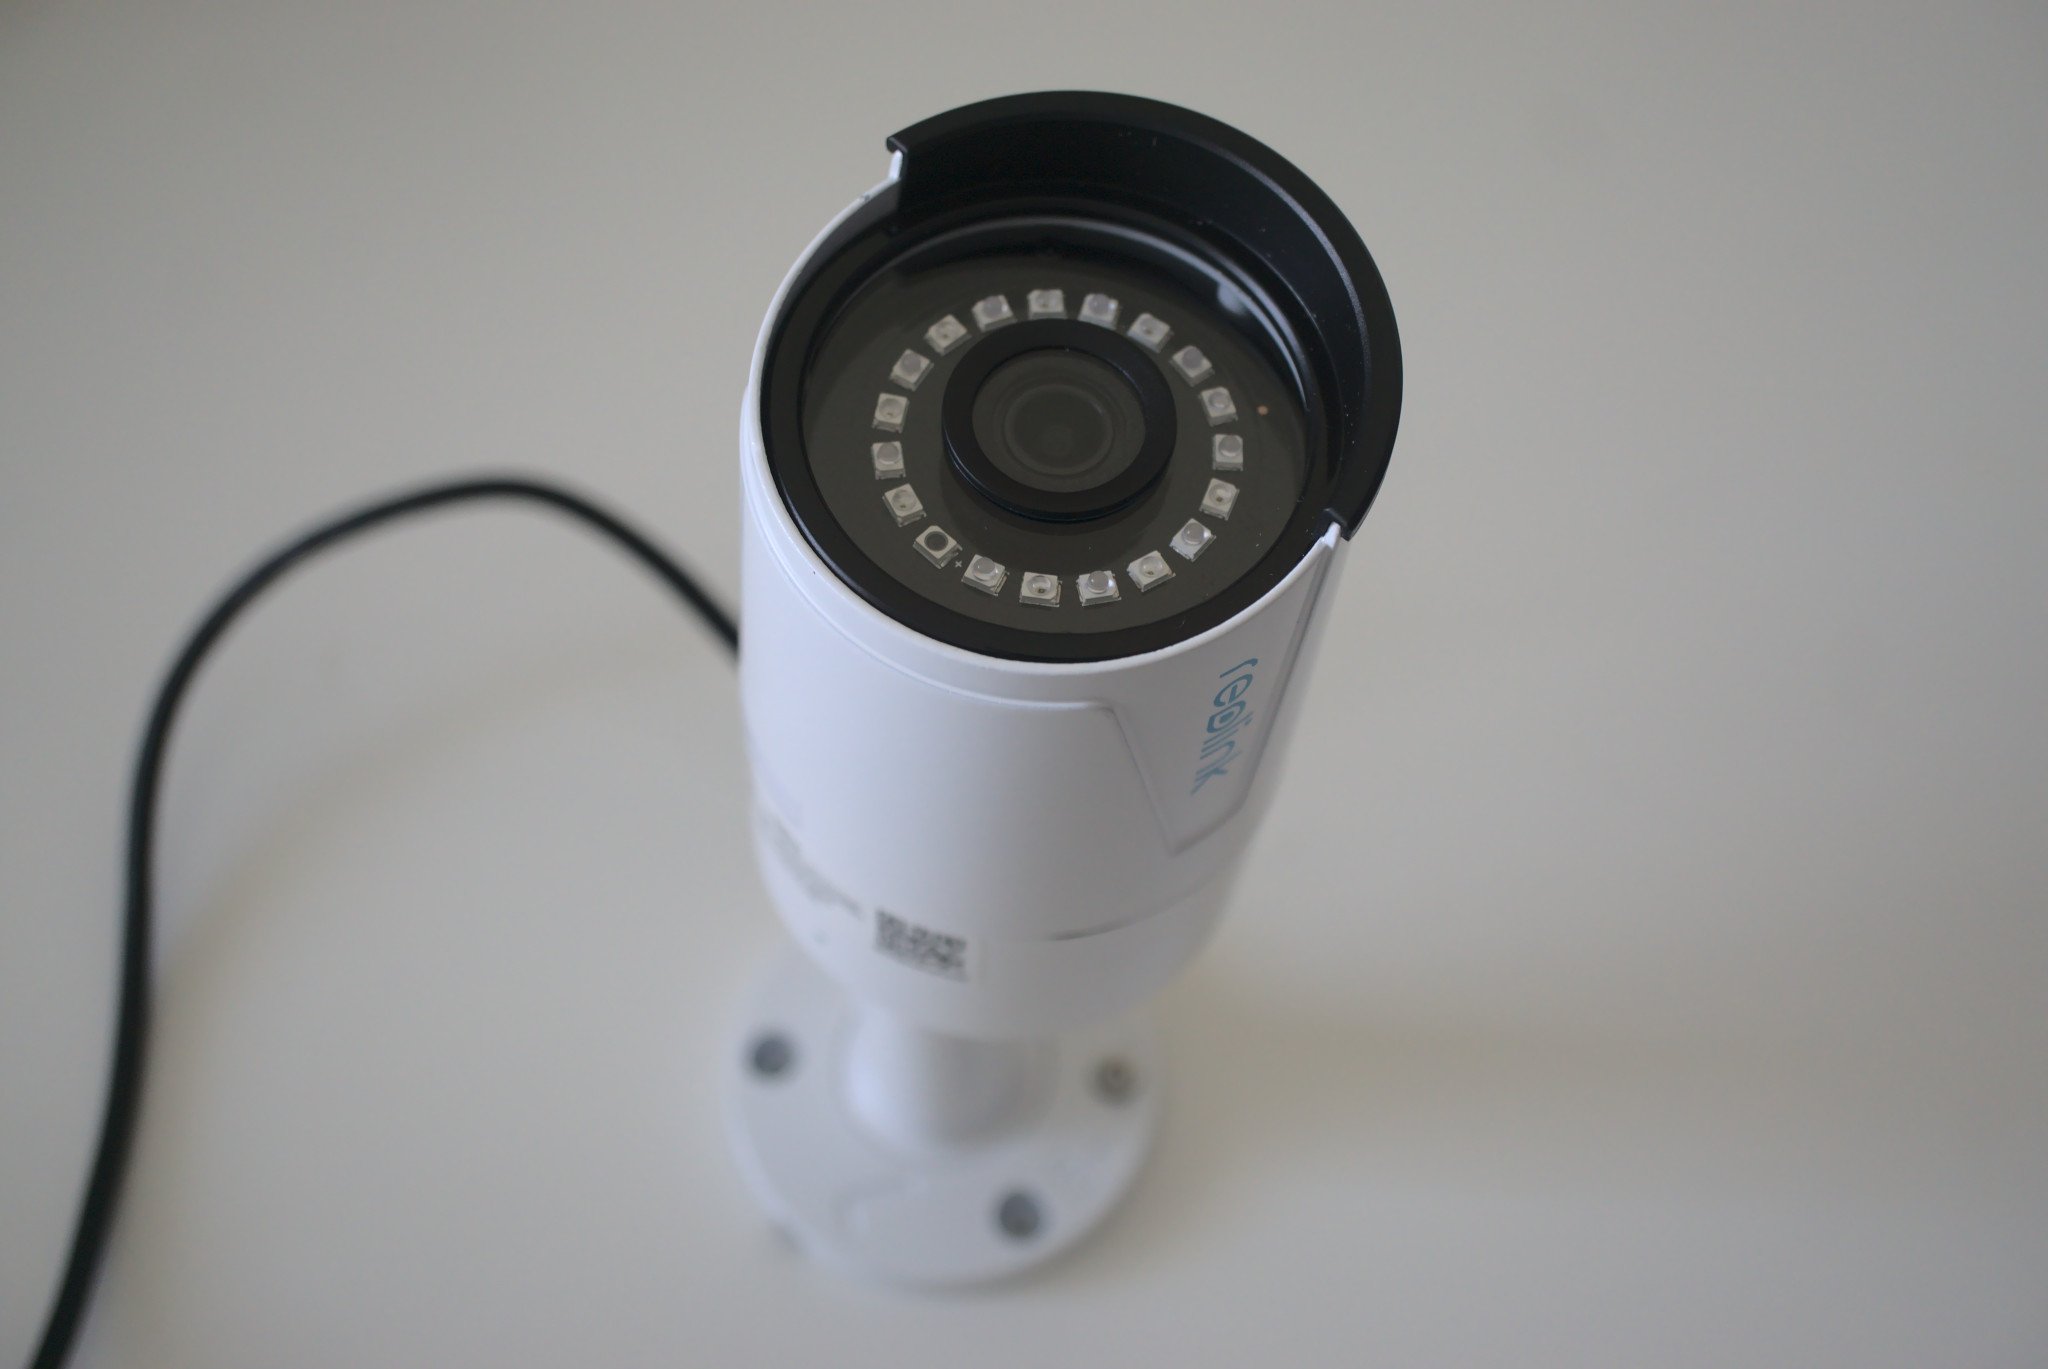 Reolink RLC-410 review: This affordable home security camera punches